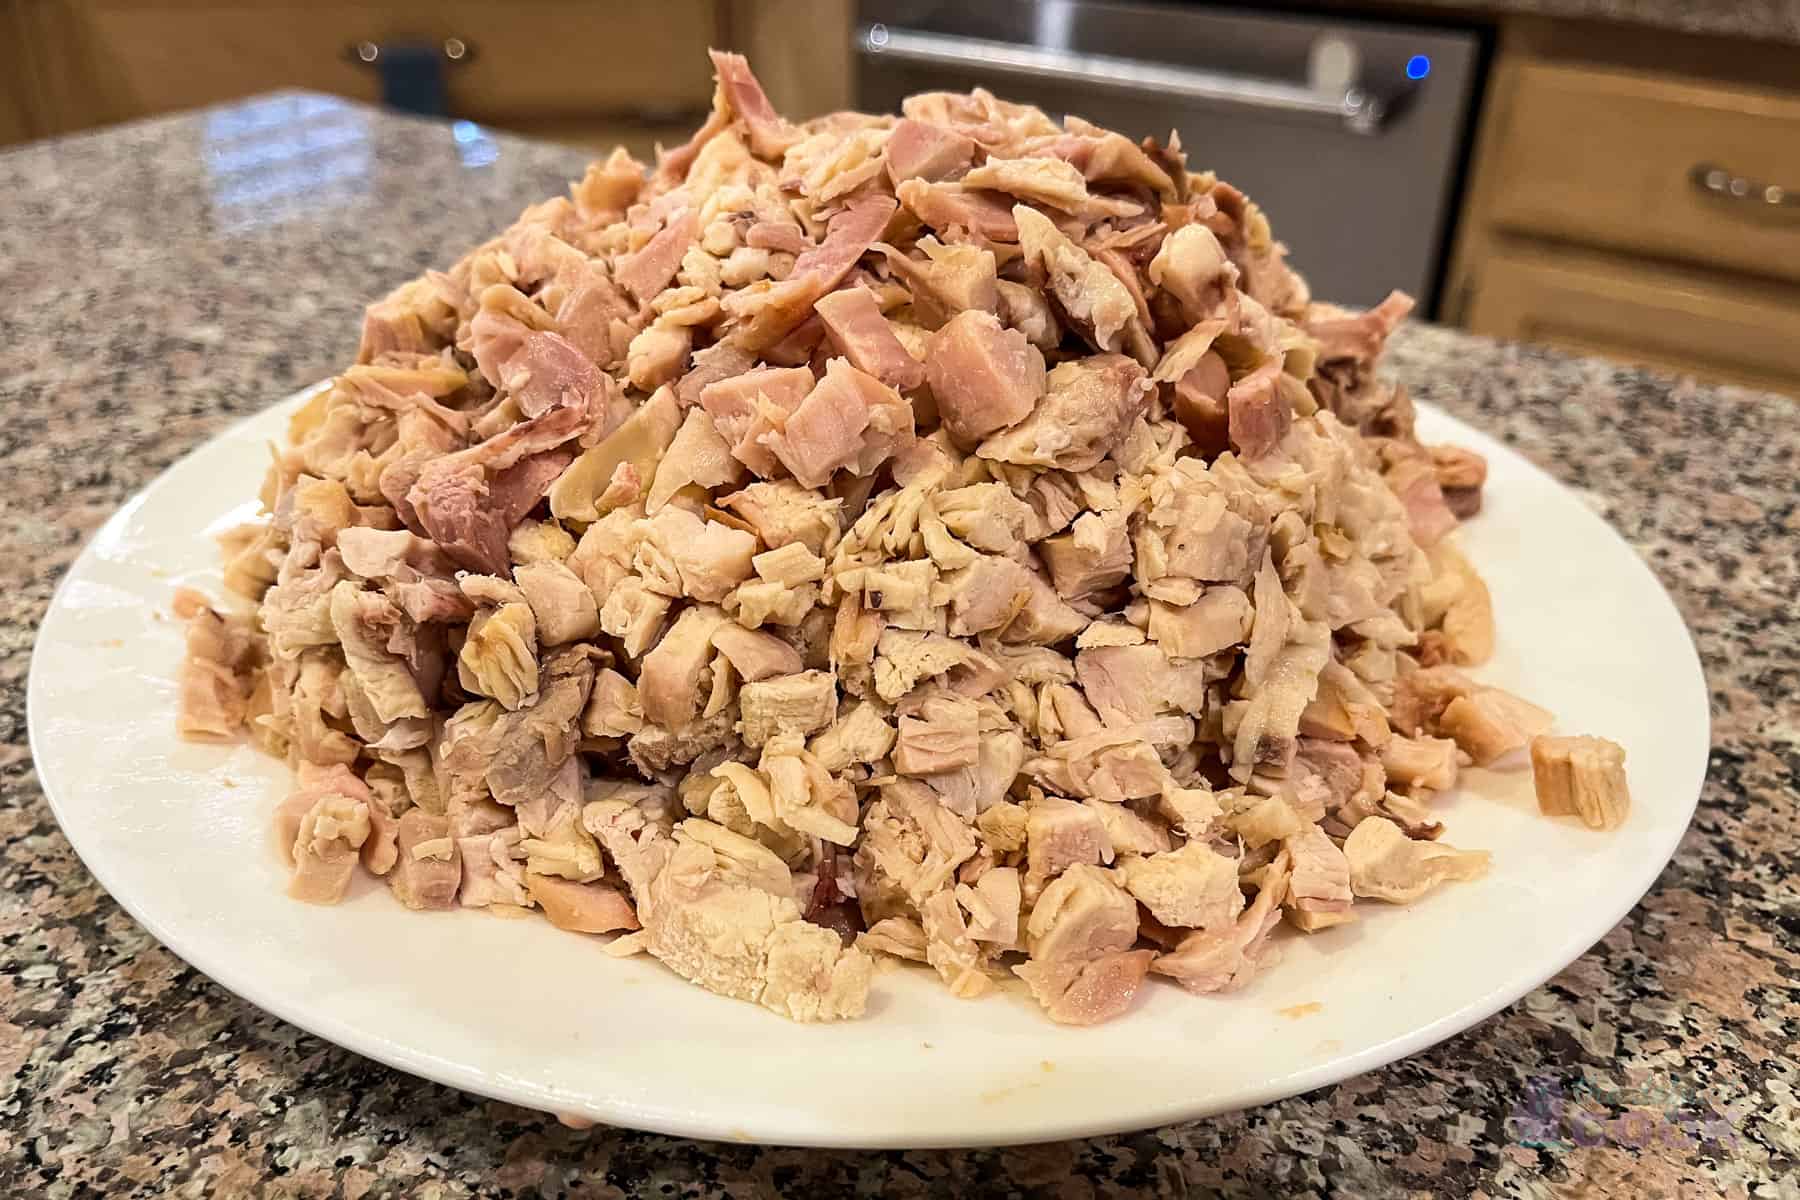 A pile of roughly diced rotisserie chicken on a plate.